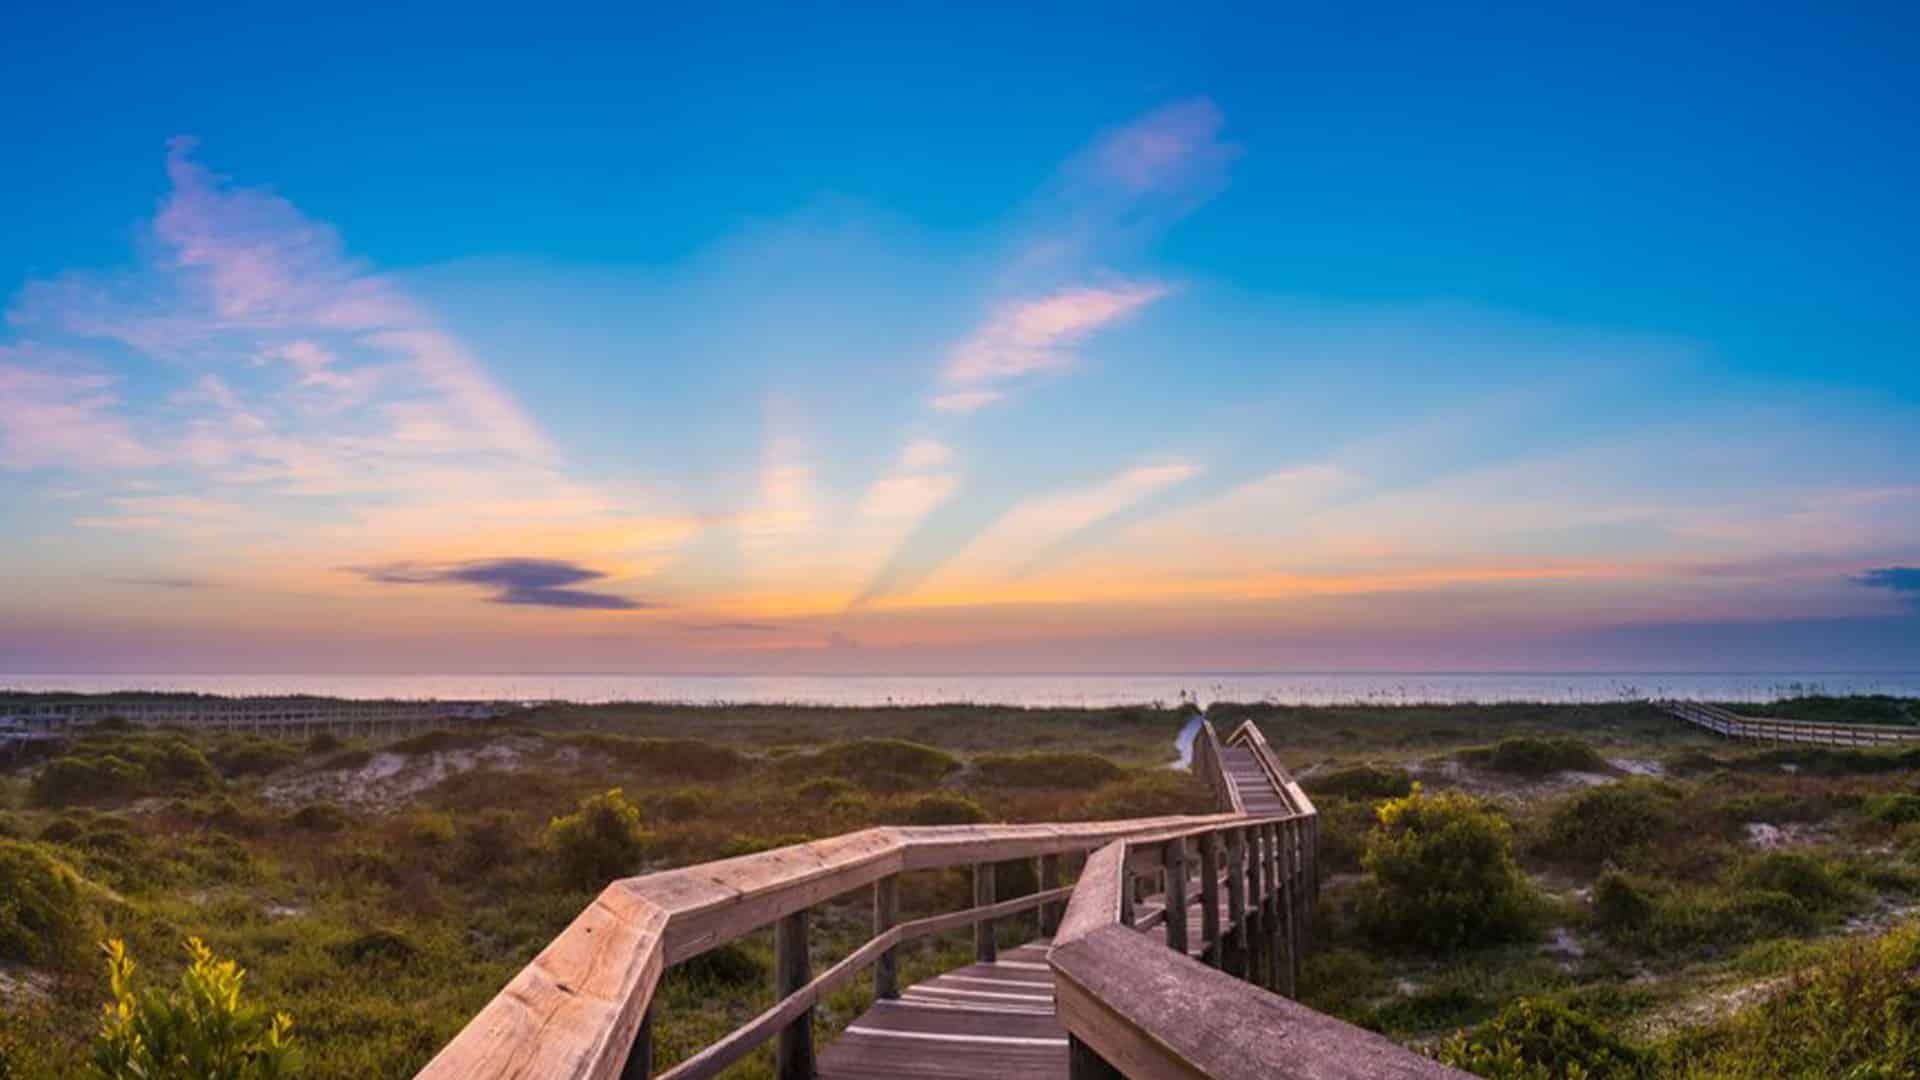 Long wooden walkway through green shrubs to the beach with water and setting sun in the background